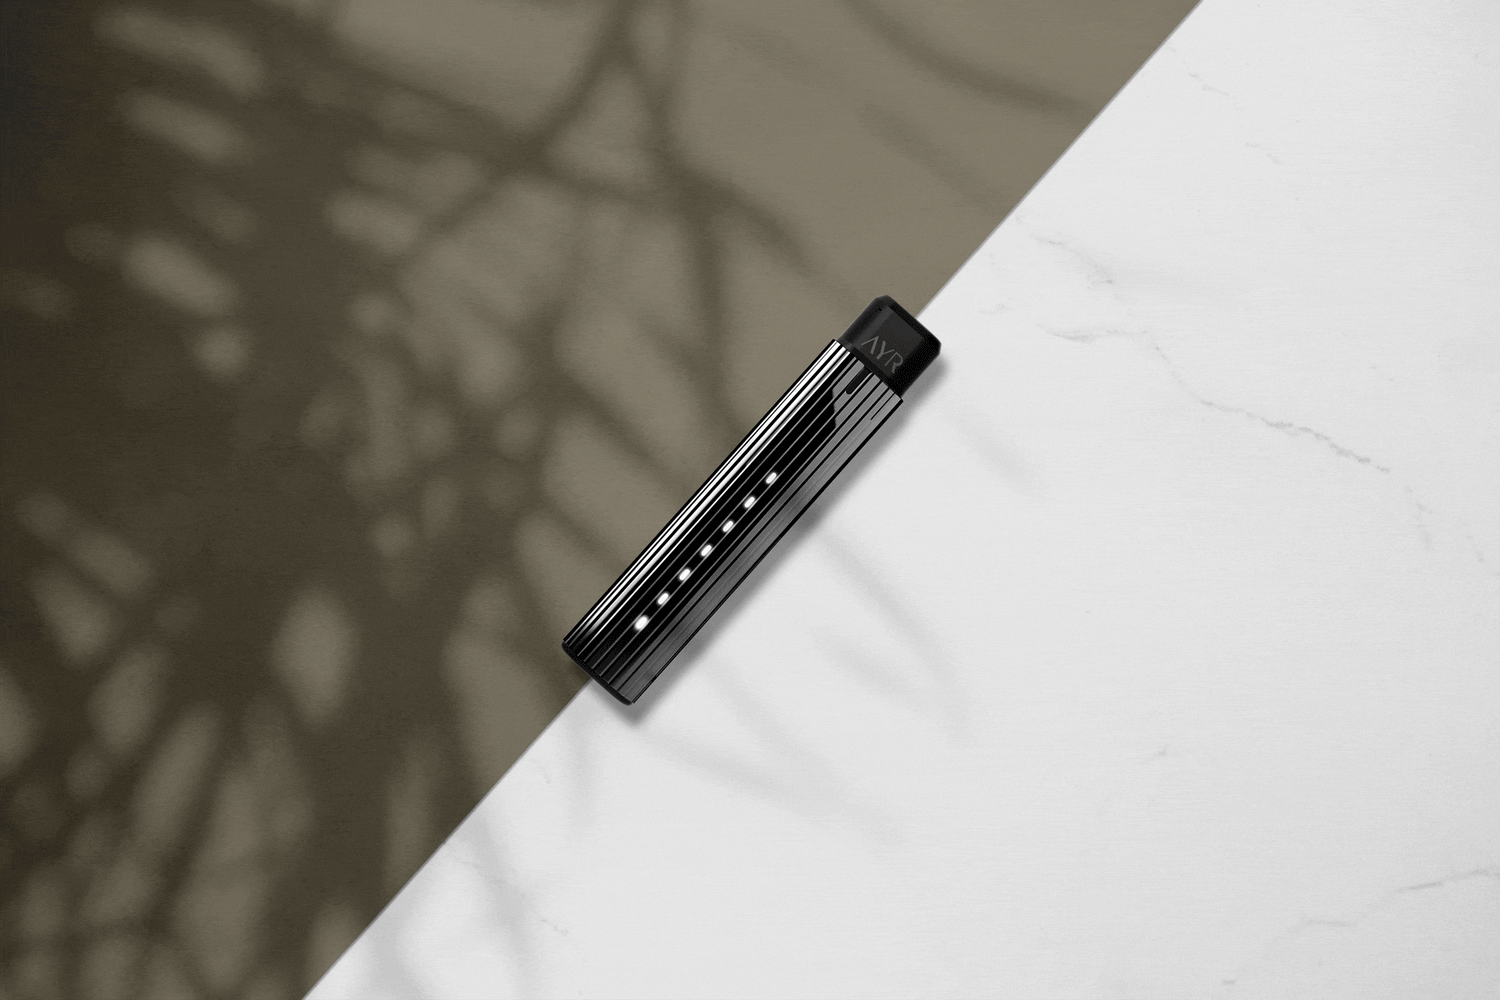 The Ayr vape pen with the glowdown LED lights to indicate how far along the user is in a vape session